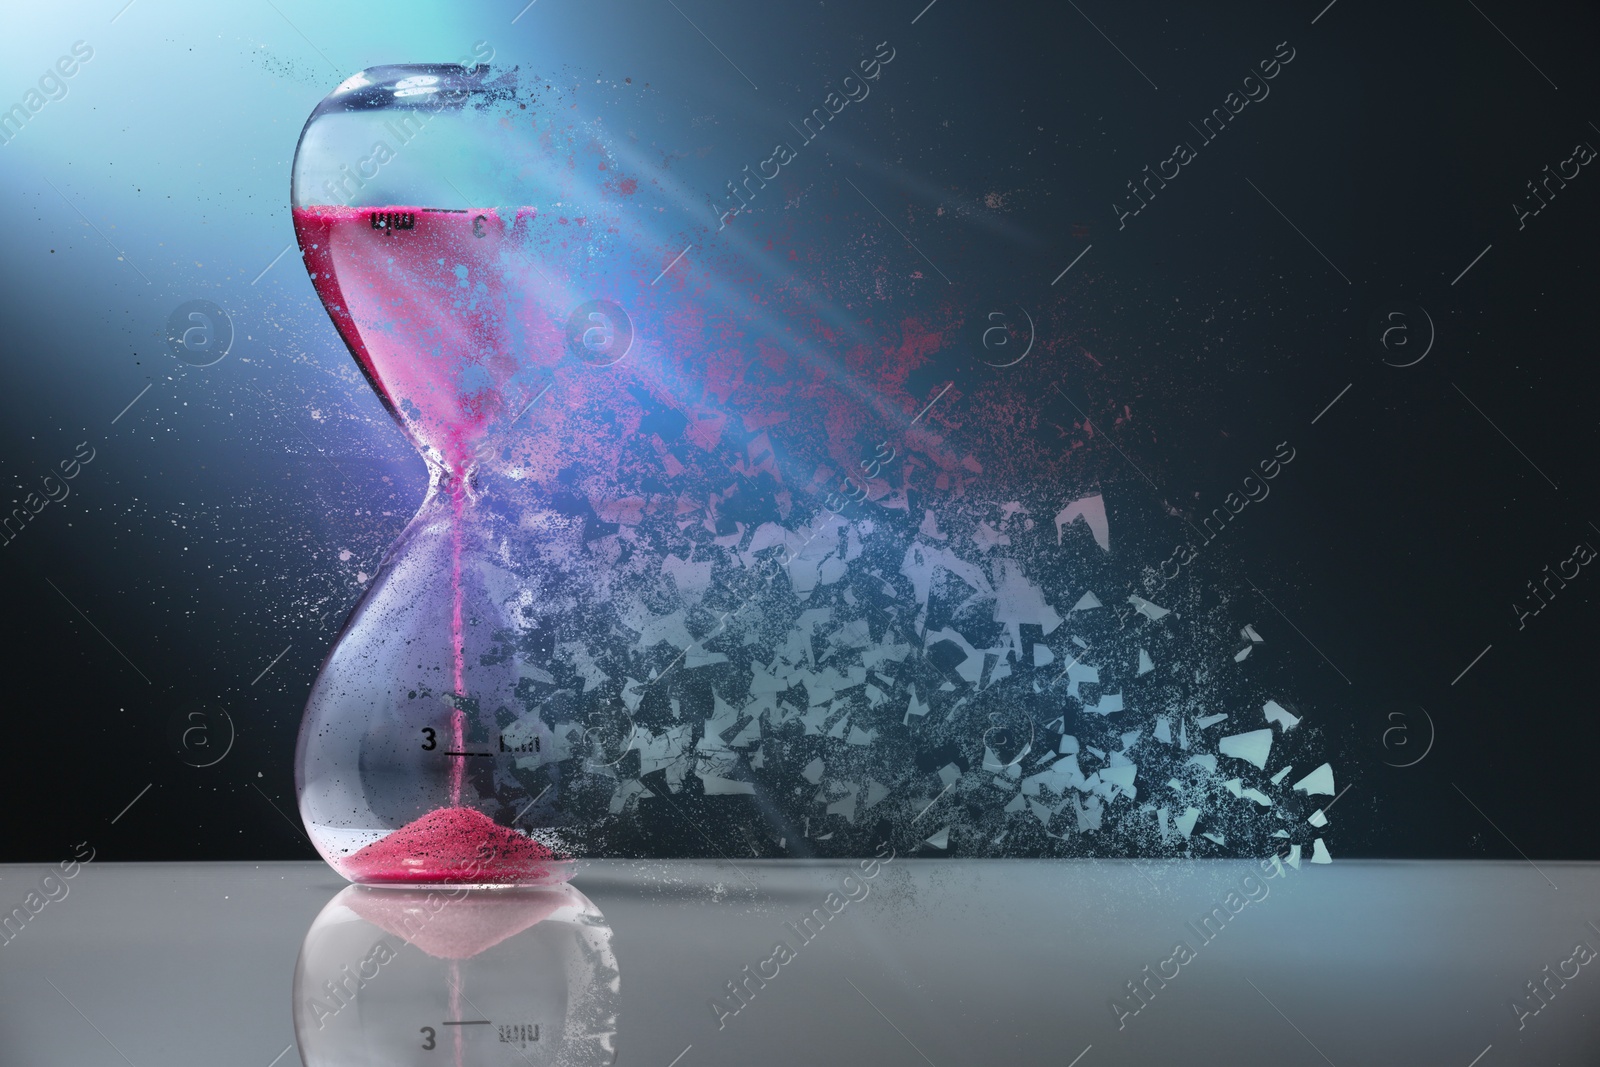 Image of Hourglass dissolving on table against dark background. Fleeting time